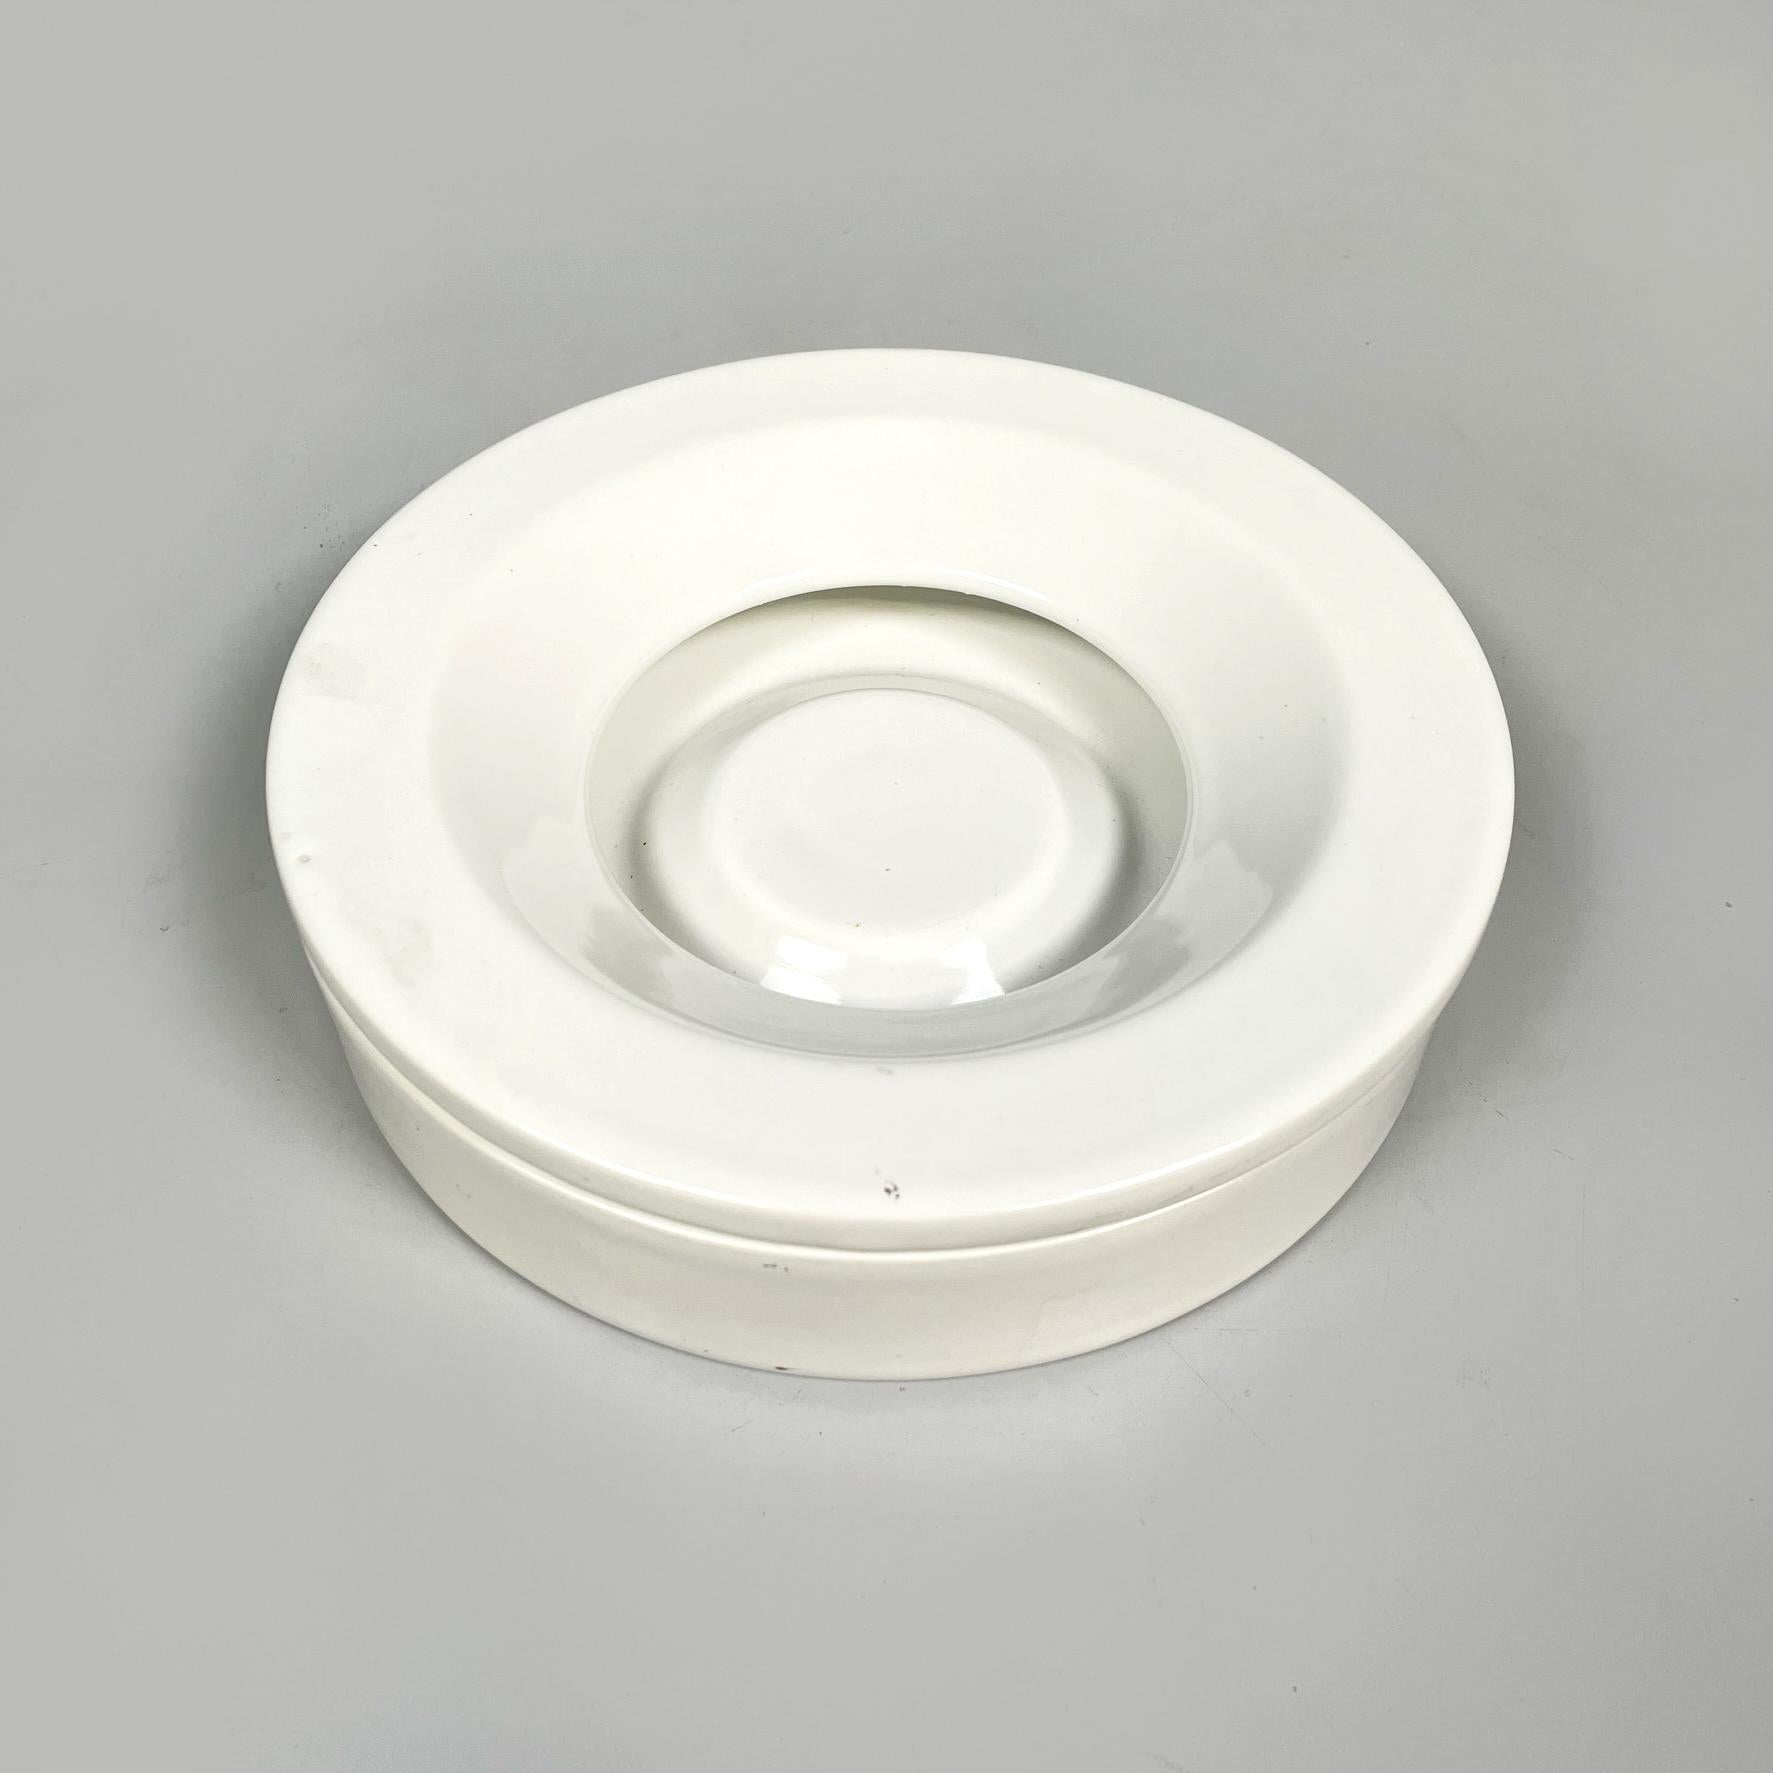 Italian Mid-Century White Porcelain Stoneware Ashtray by Angelo Mangiarotti for Danese, 1970s
Round ashtray with cover in white porcelain stoneware. The plate has a slight rise in the central area. The cover is donut-shaped and tends to sag towards